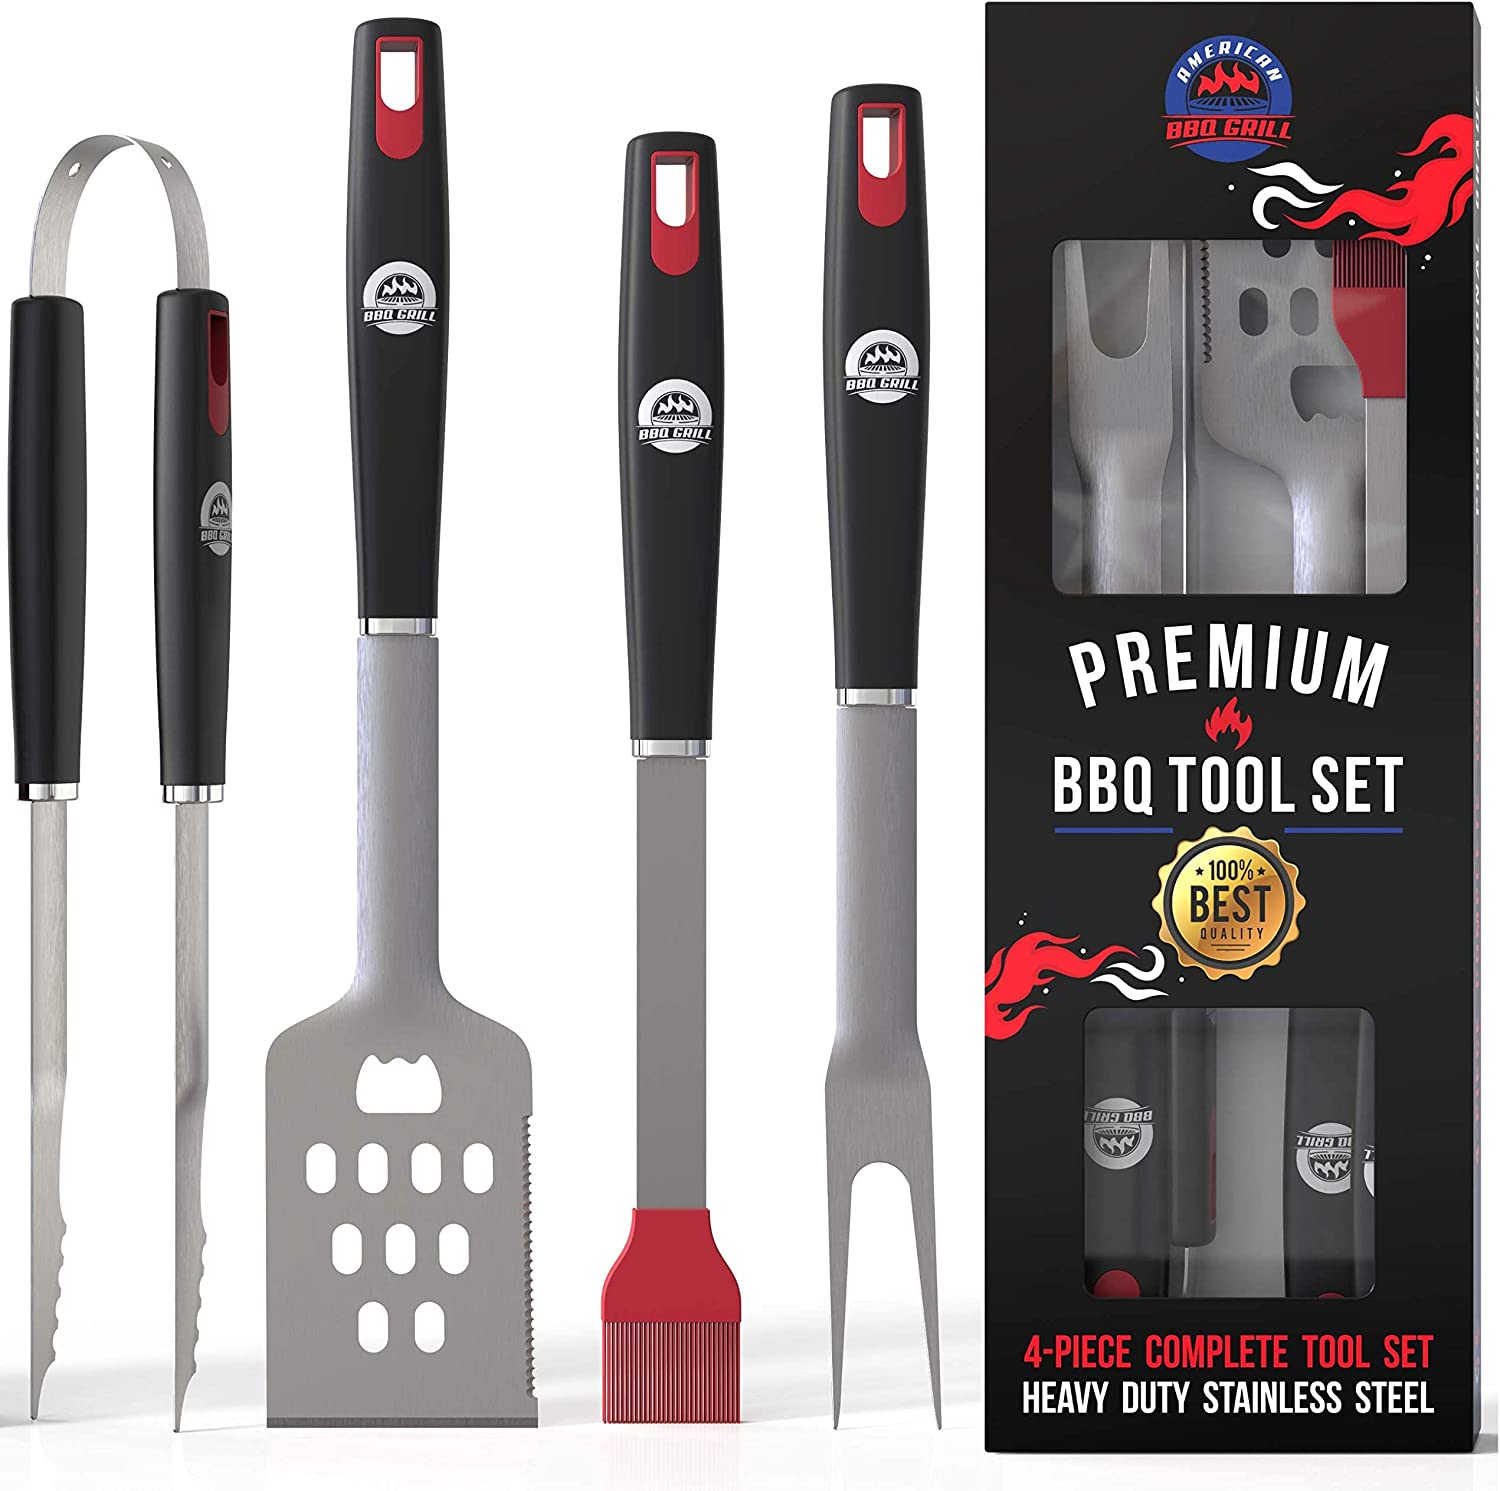 BBQ Tools Sets Premium Barbecue Utensils - 4 Piece Grill Kit Accessories with Spatula, Fork, Brush & BBQ Tongs Stainless Steel Grill Tools